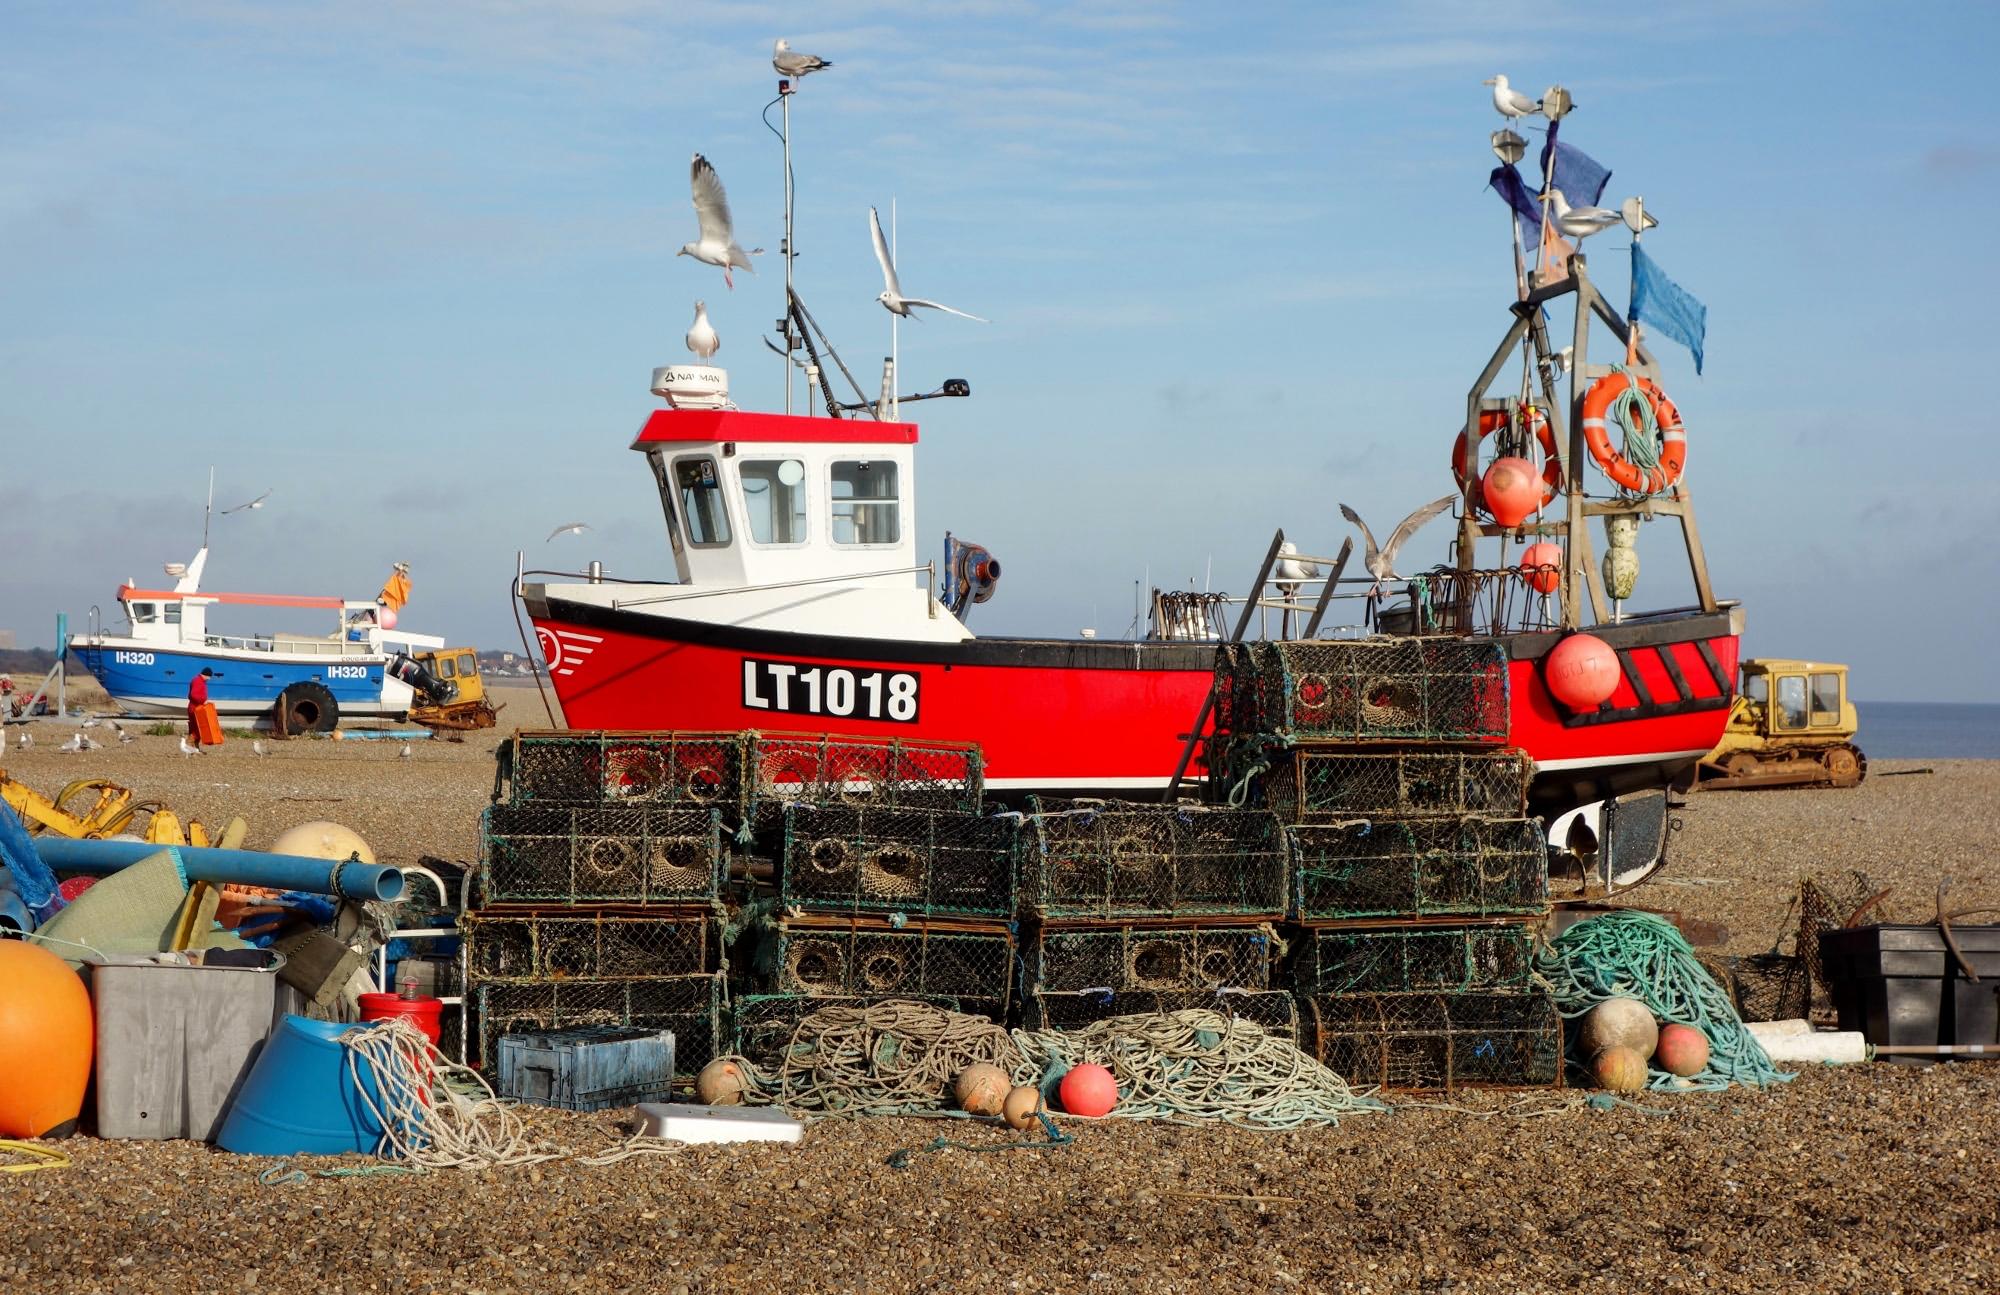 Some of the remaining working fishing boats on Aldeburgh beach